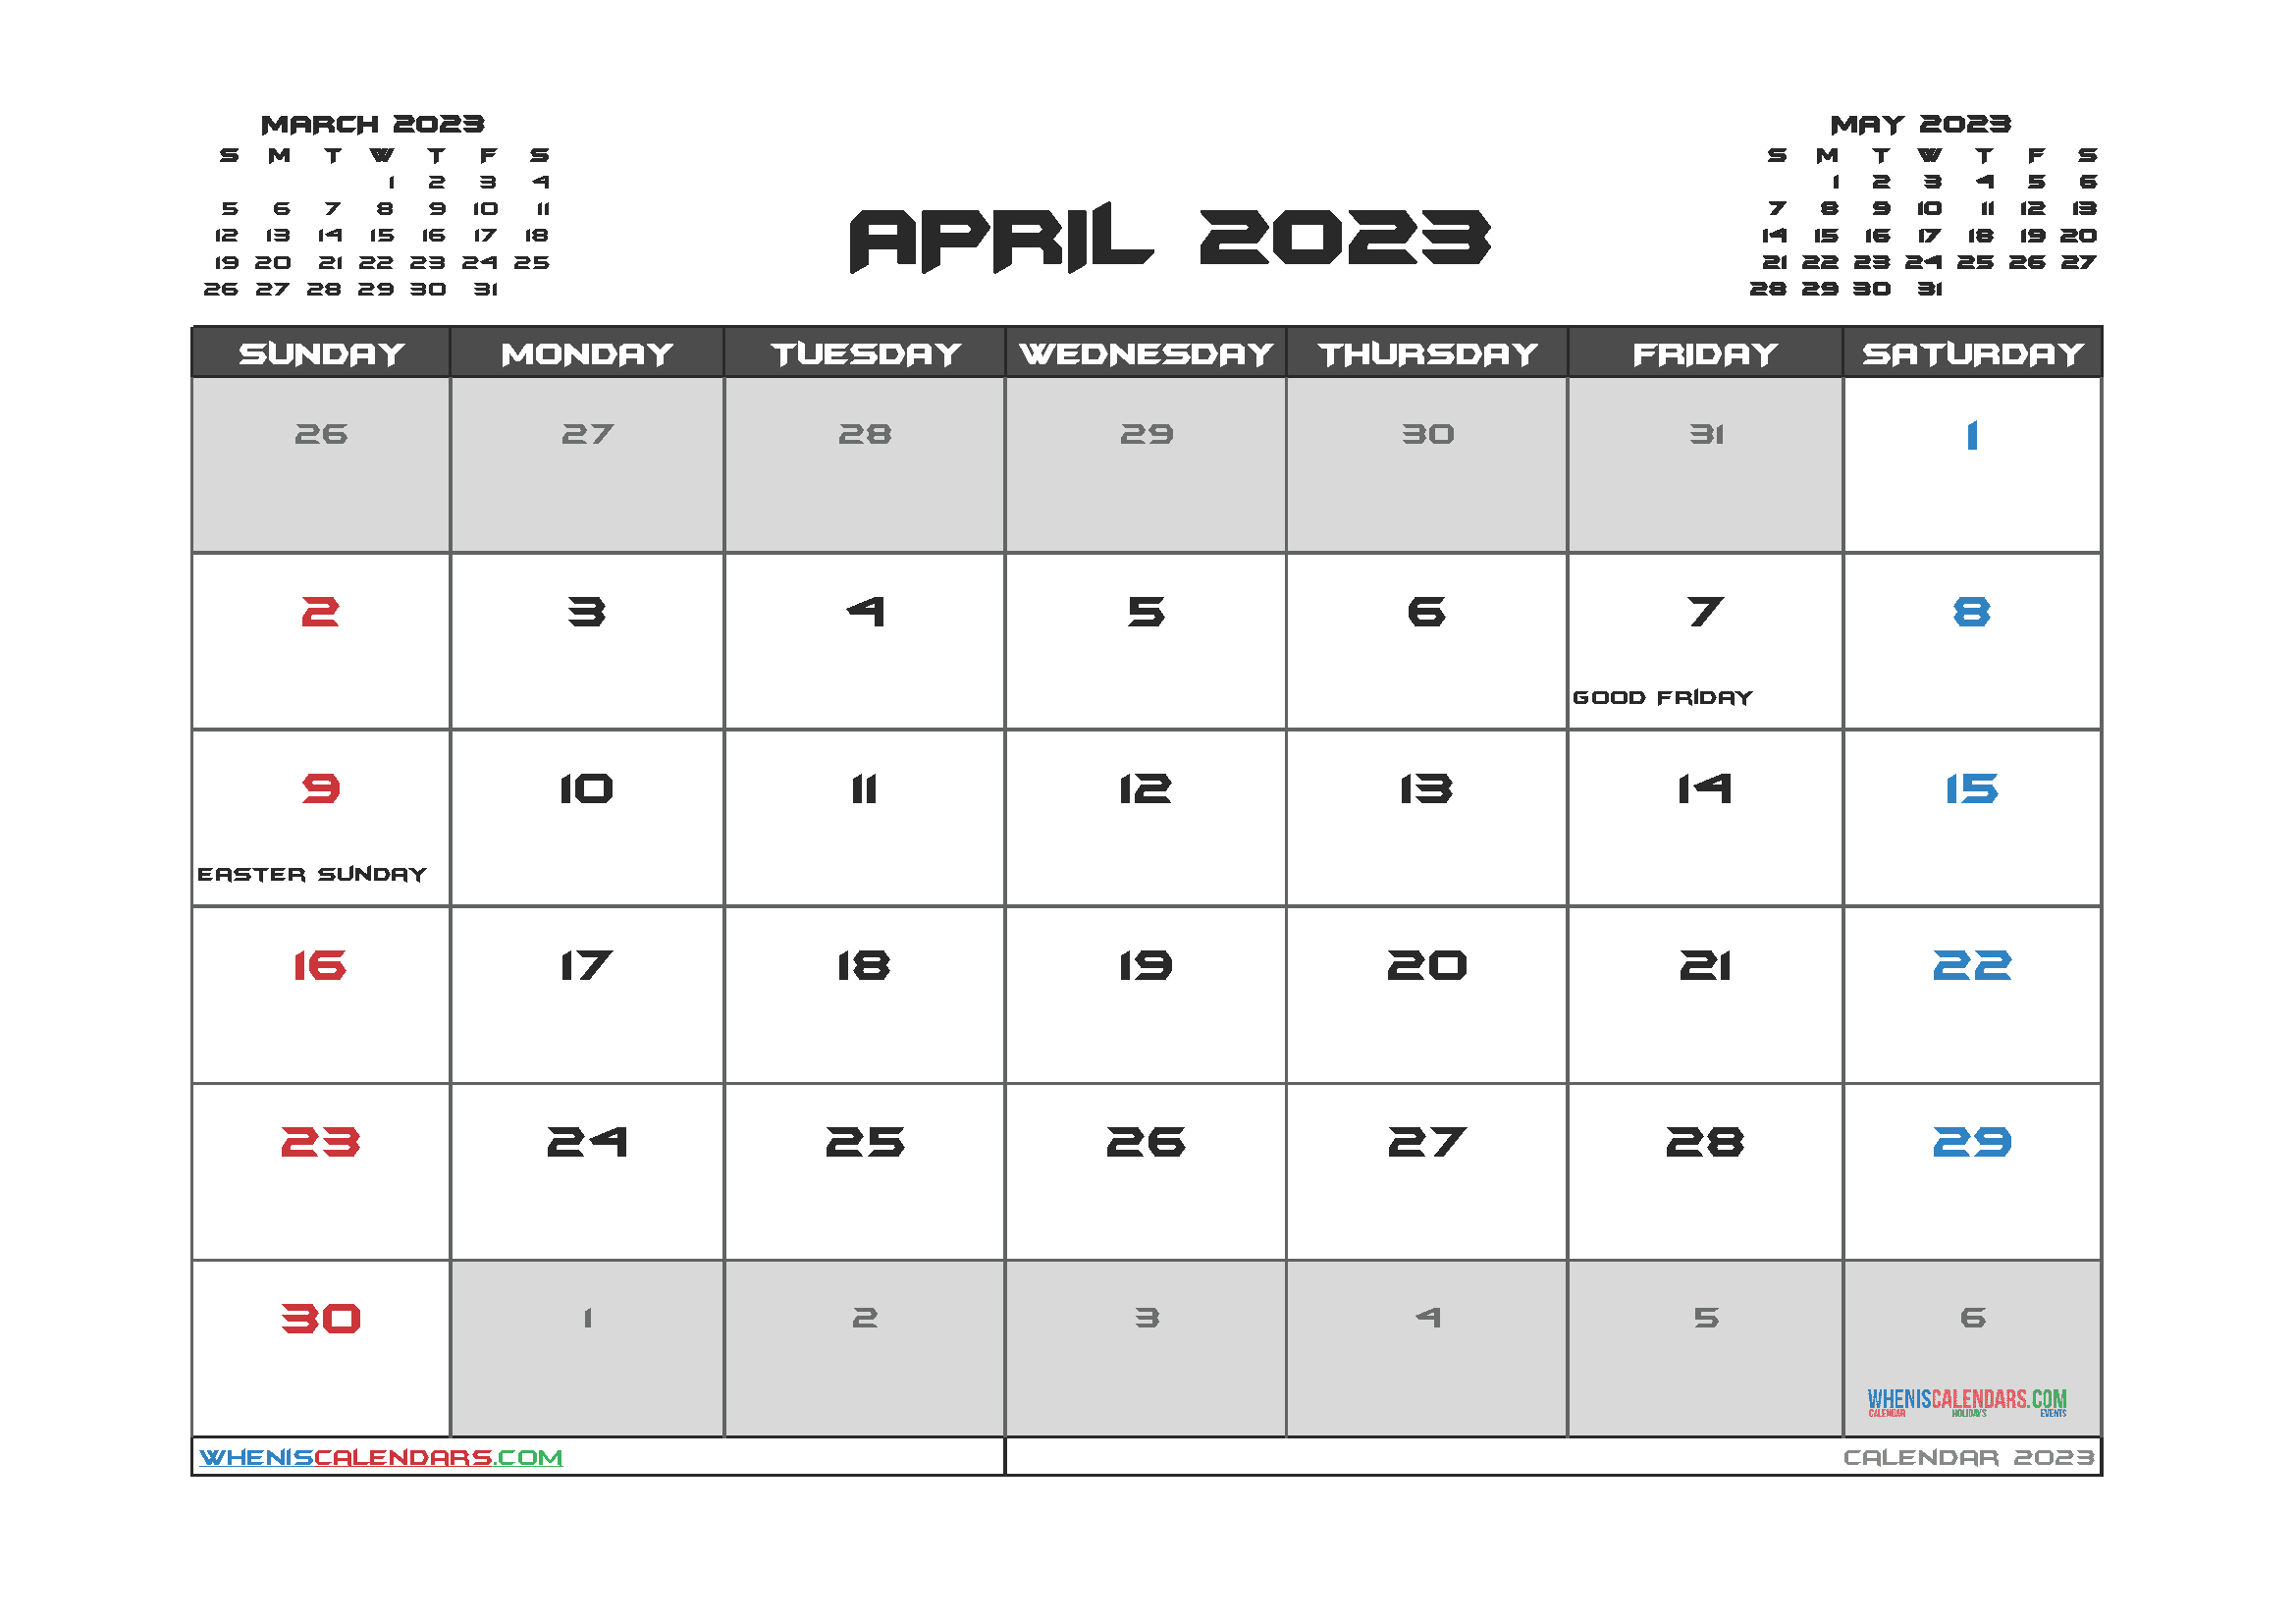 April 2023 Calendar with Holidays Free Printable PDF in Landscape